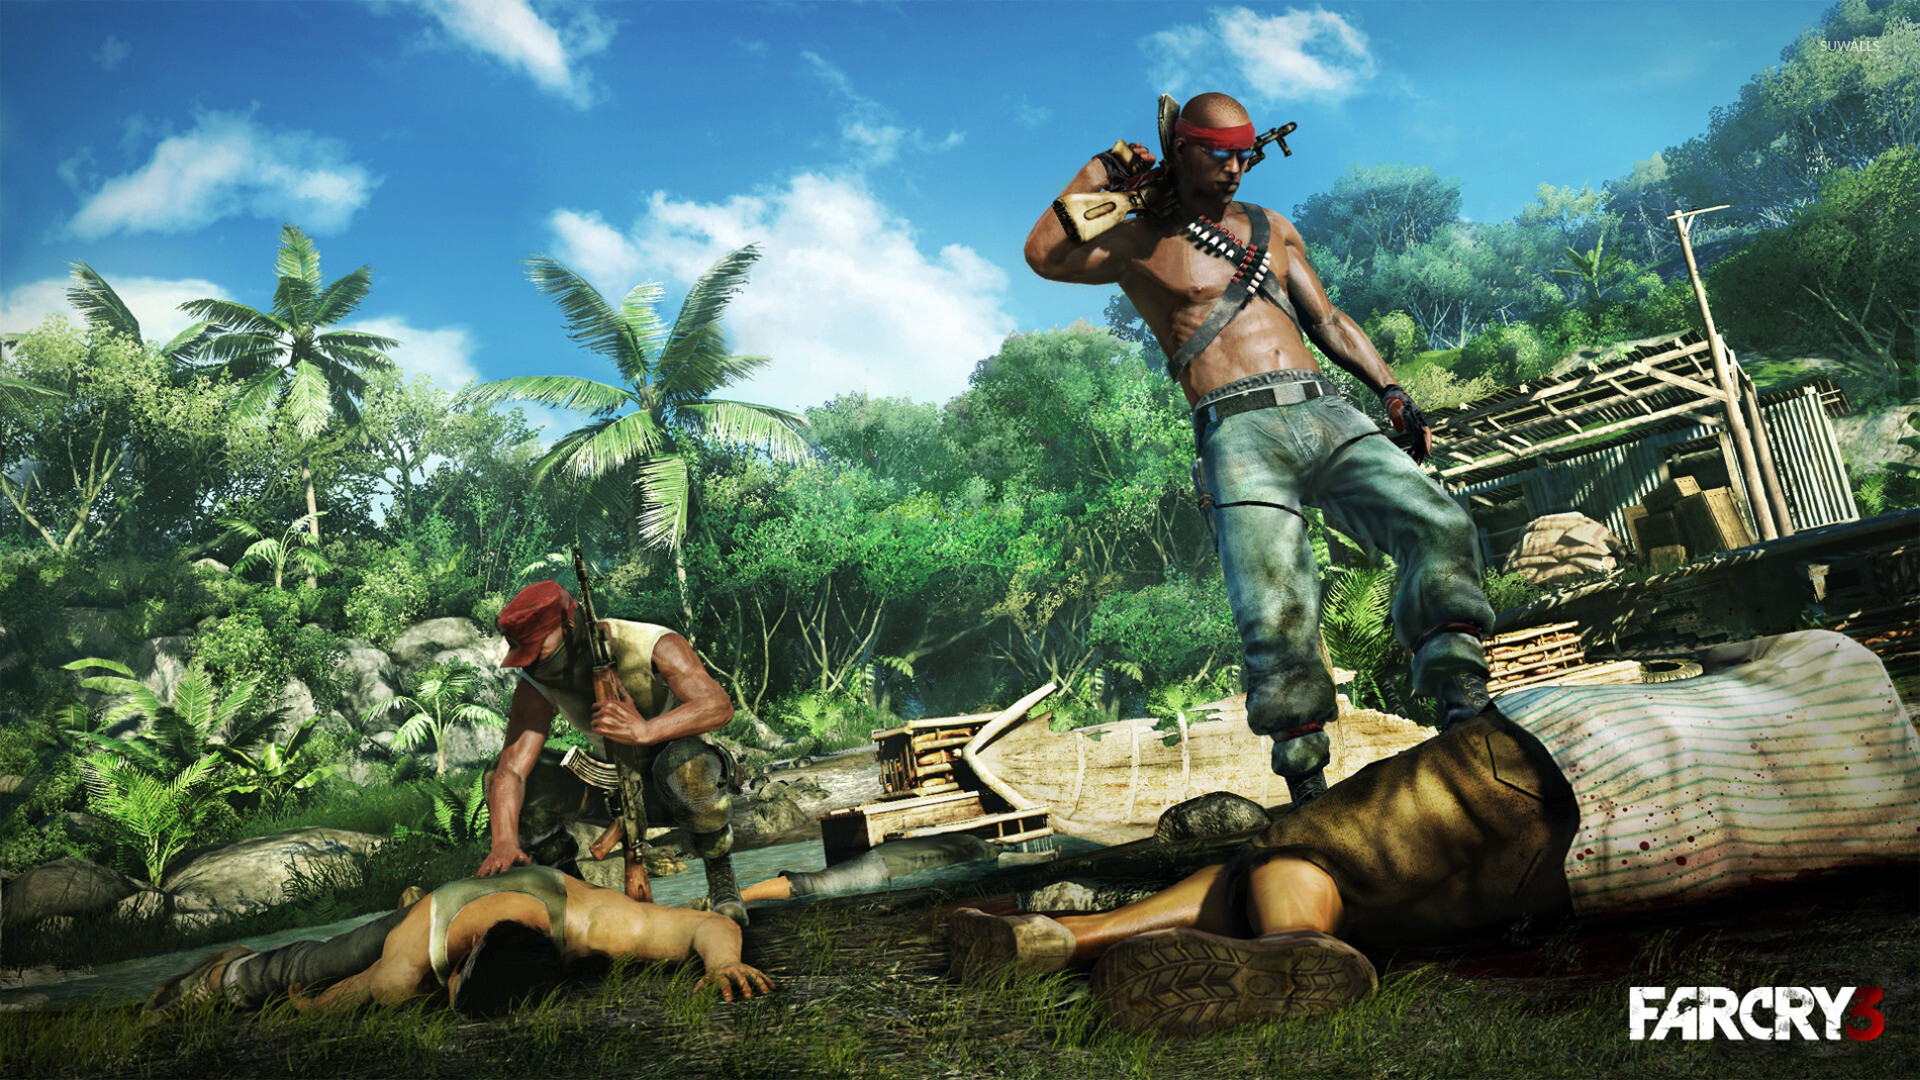 Far Cry 3: The 3rd Installment of the franchise developed by Ubisoft. 1920x1080 Full HD Wallpaper.